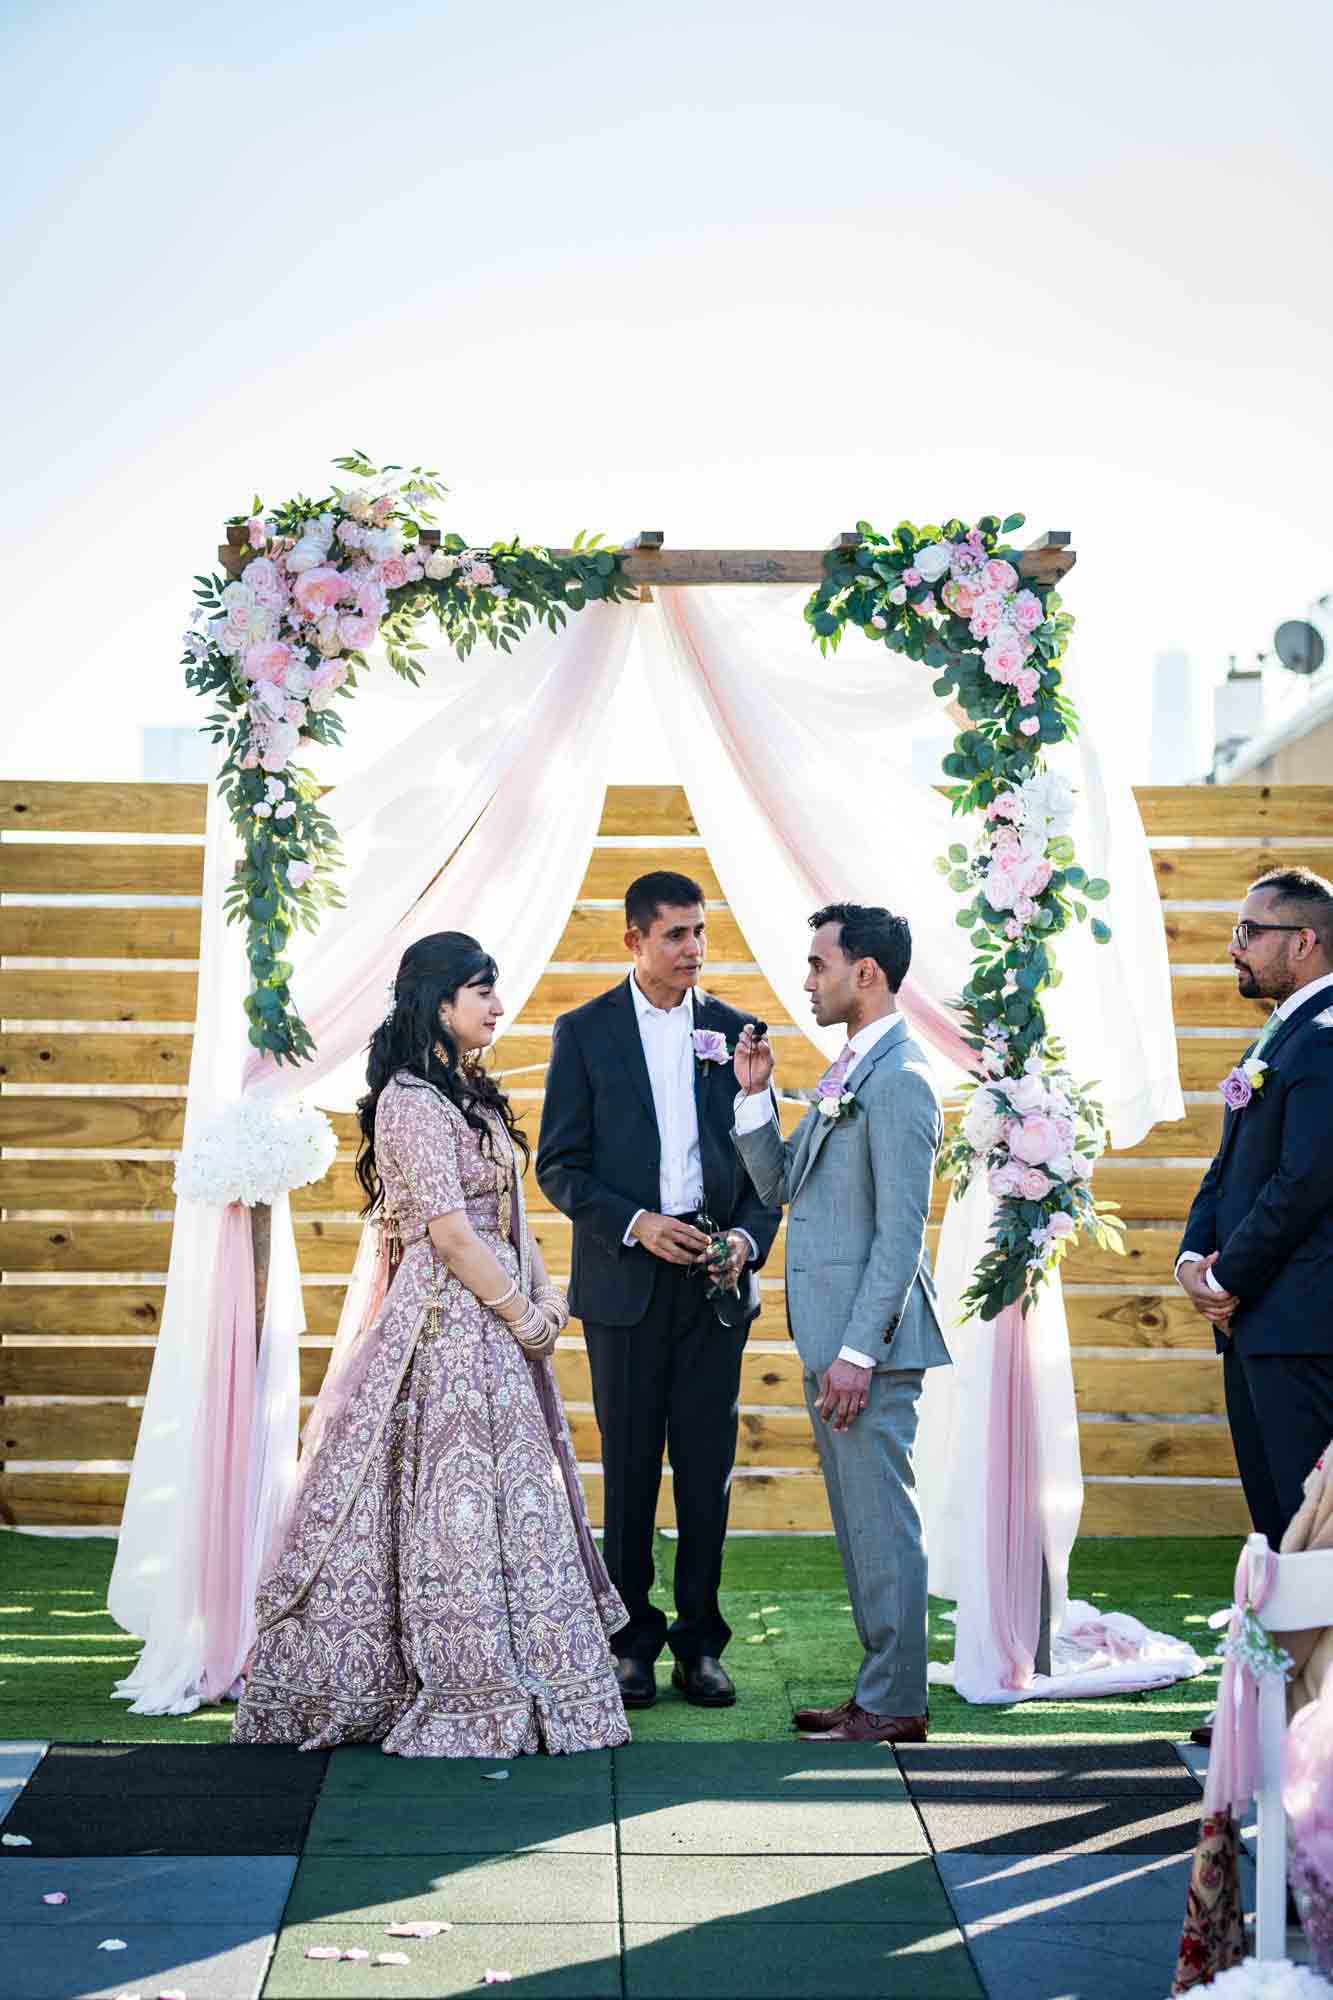 Bride and groom saying vows under floral arch for article on wedding reception game ideas